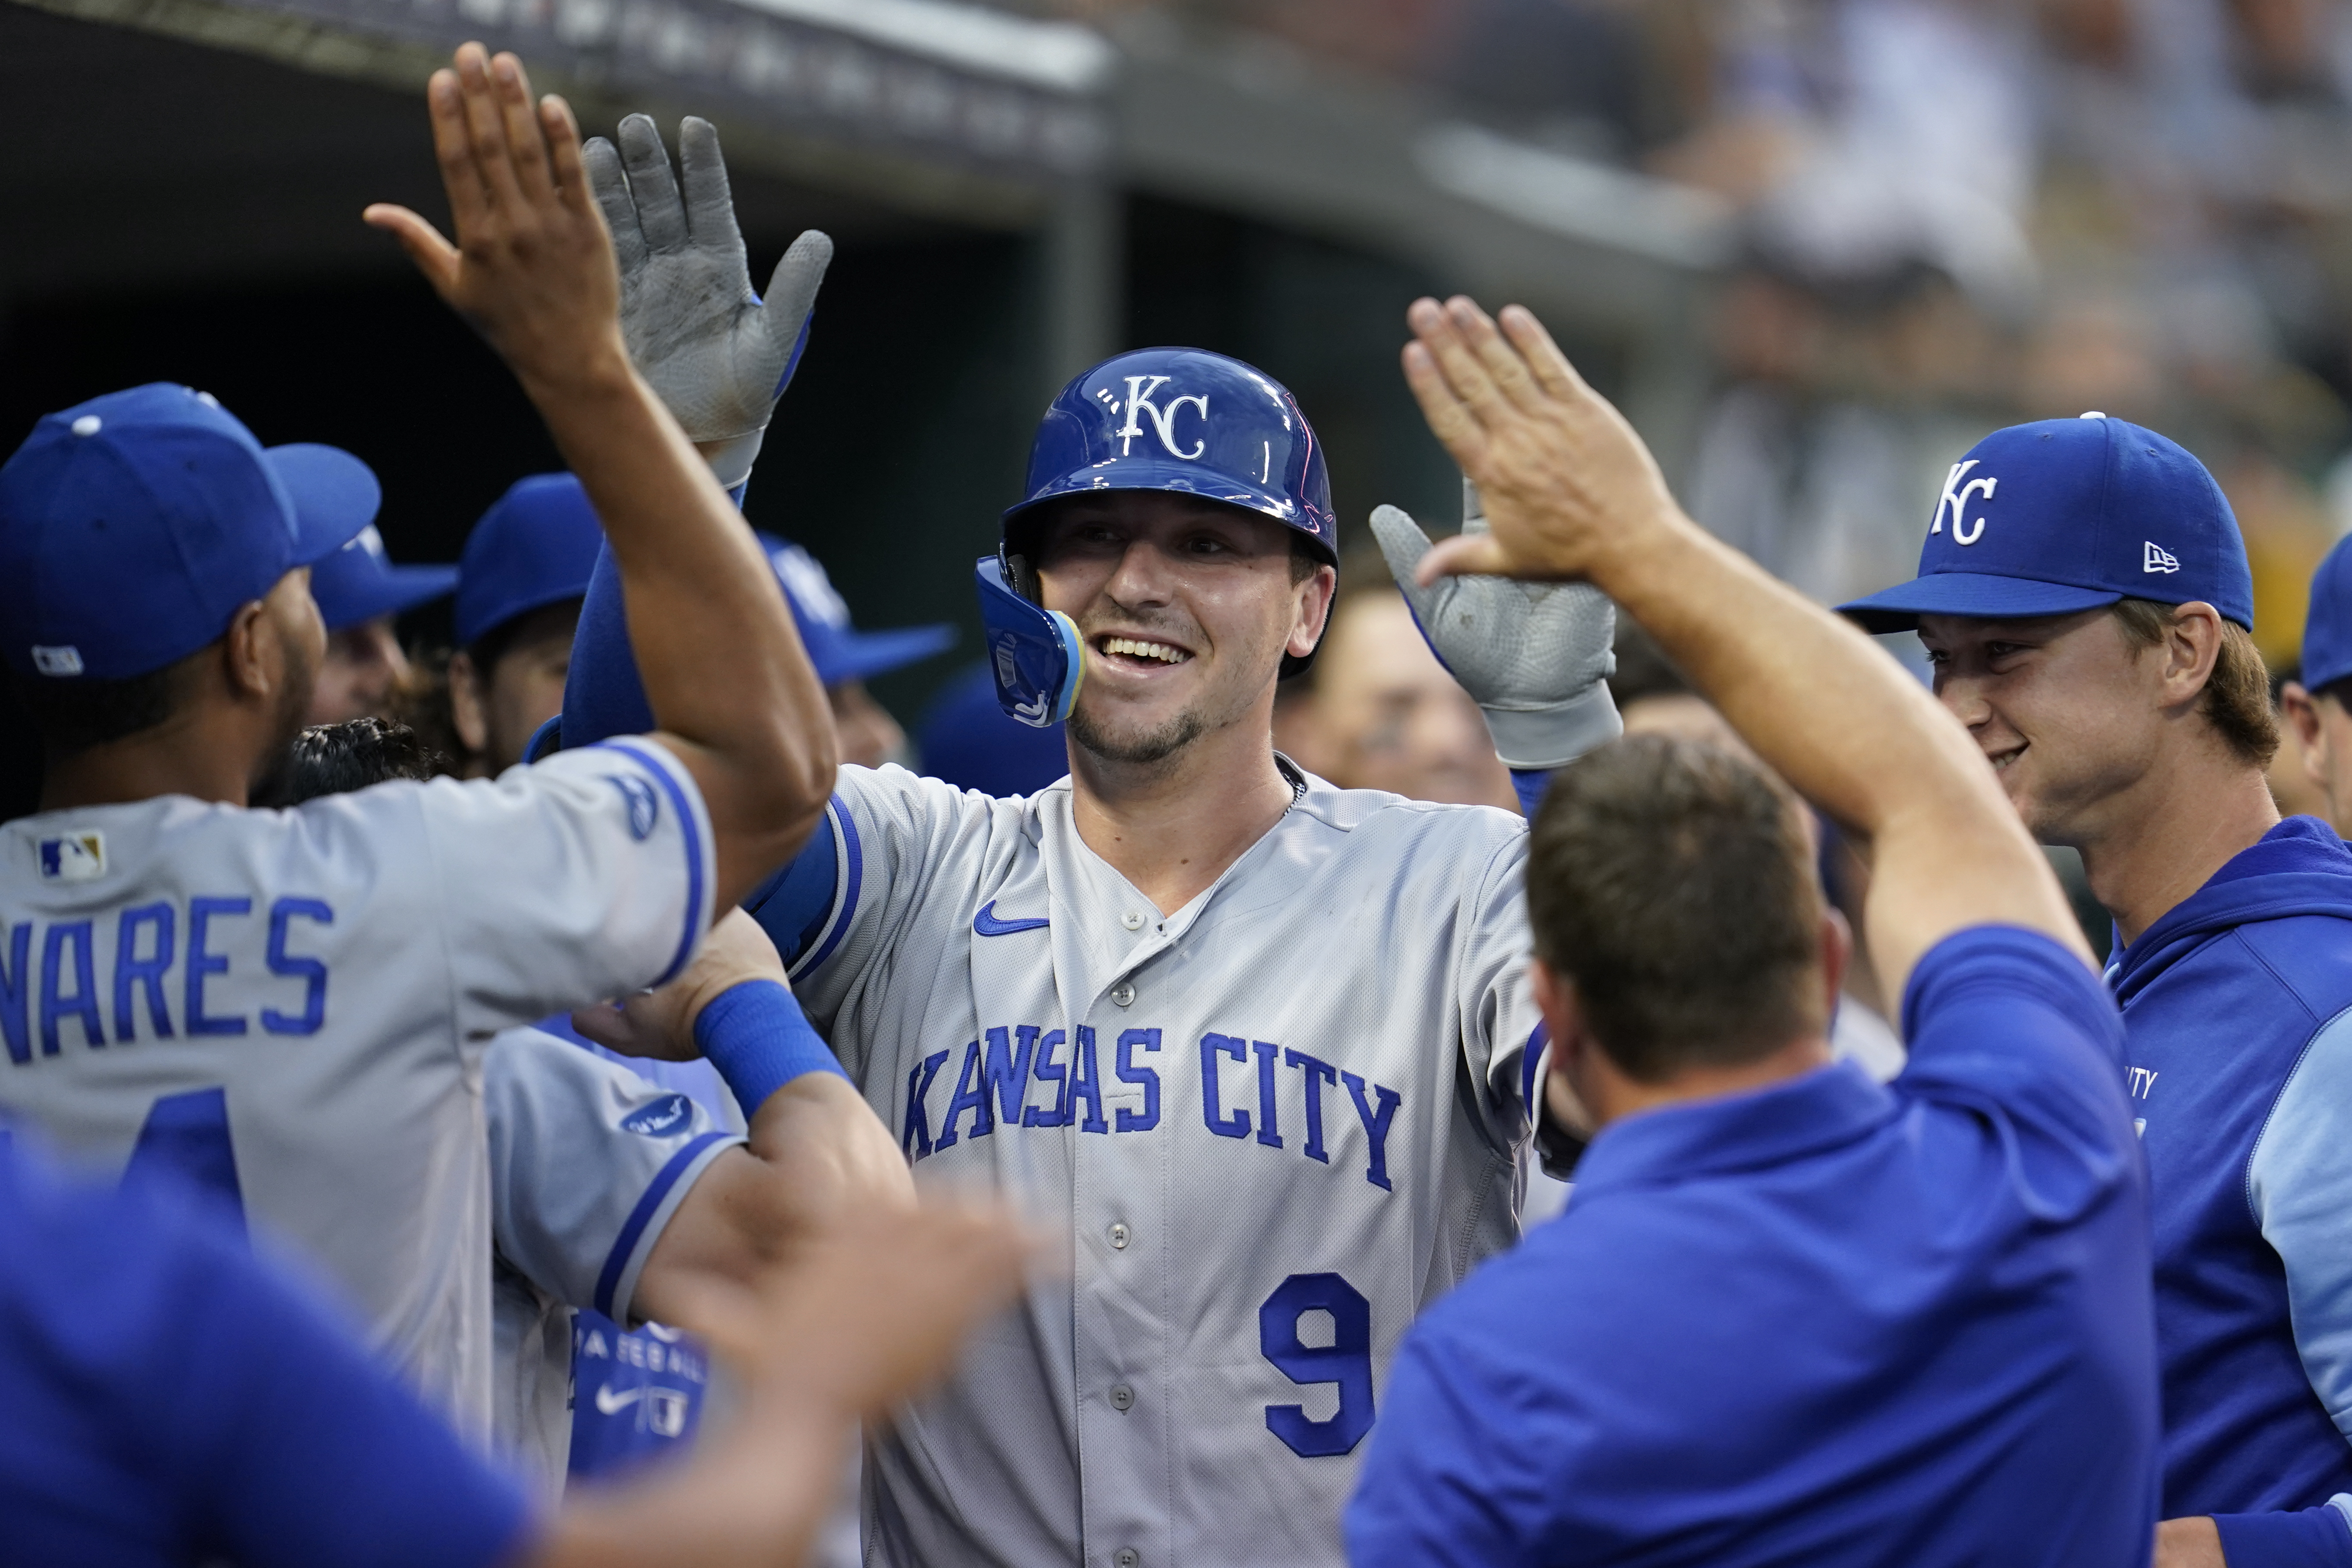 Royals 1B Vinnie Pasquantino expected to miss remainder of season